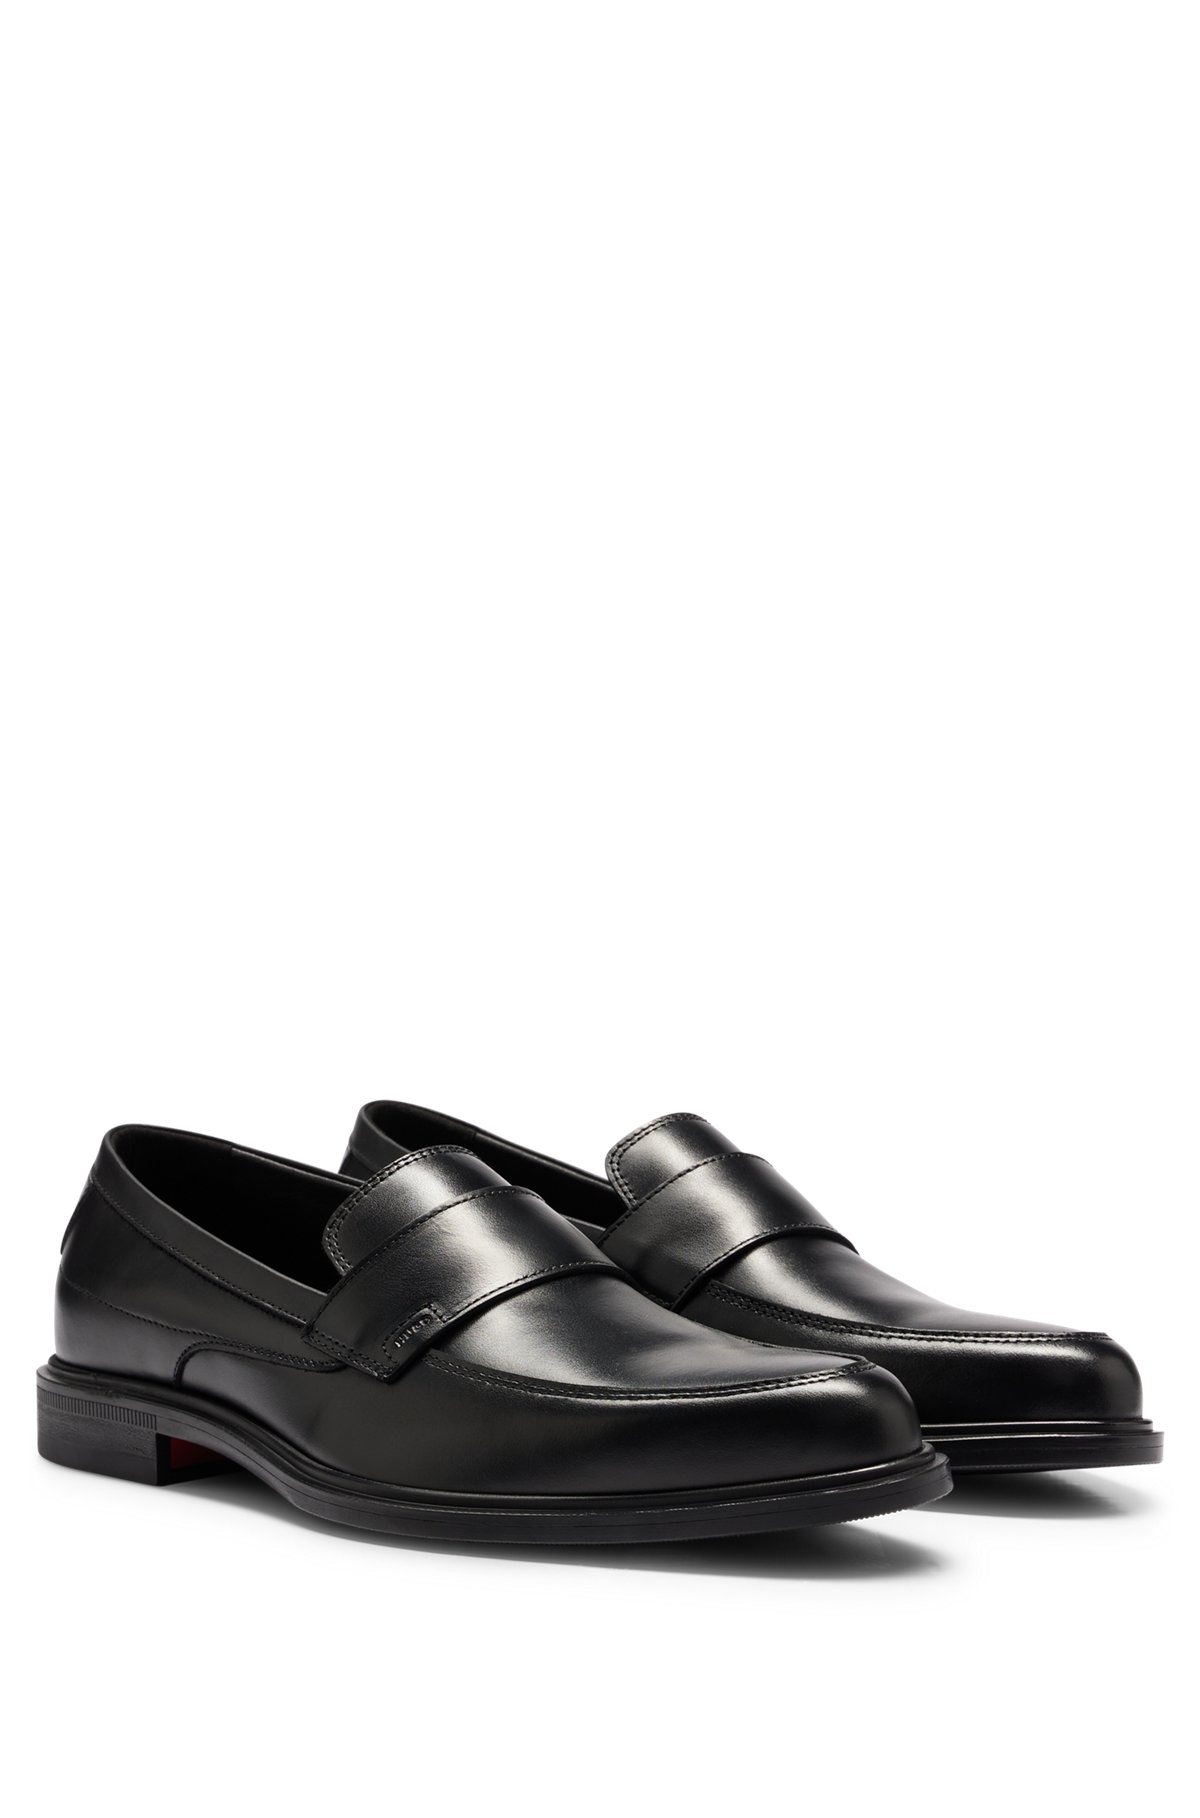 Nappa-leather loafers with stacked logo trim, Black